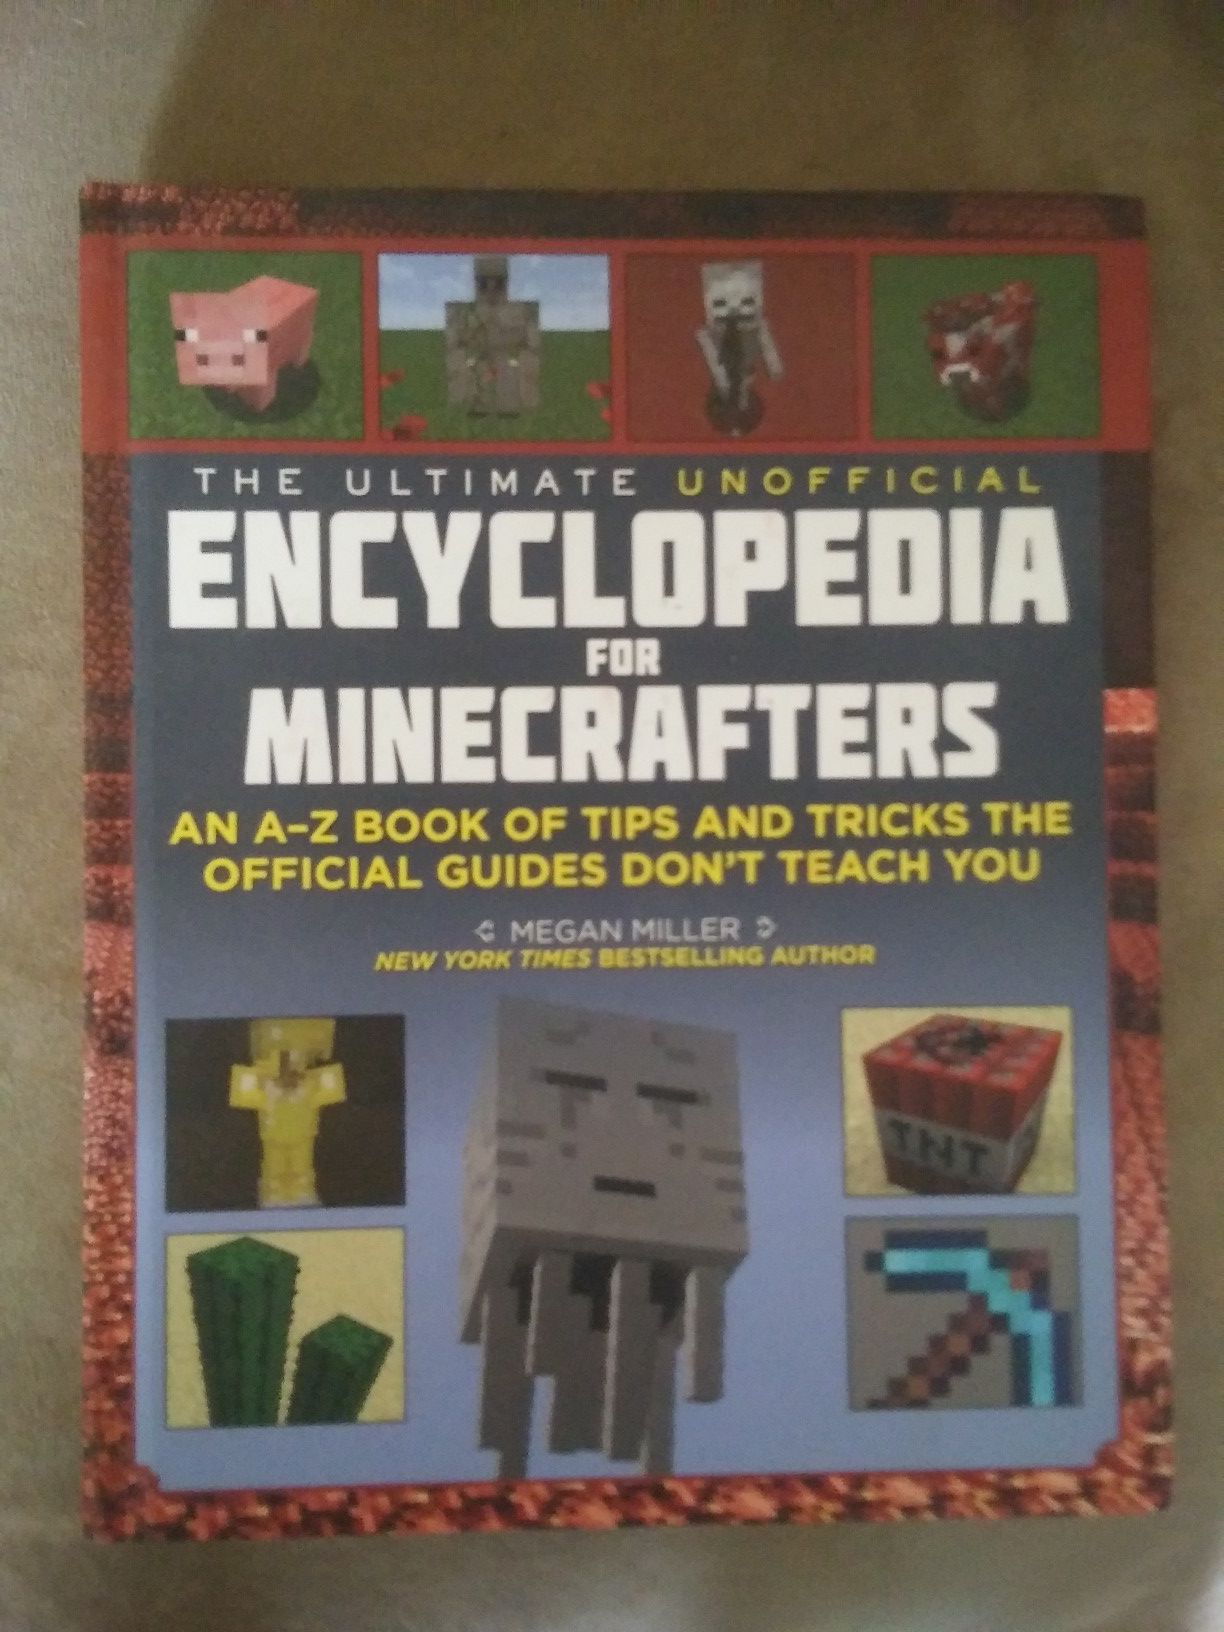 Large Minecraft Books in good condition *were each $10 or more when purchased* (all 6 for $12 total)